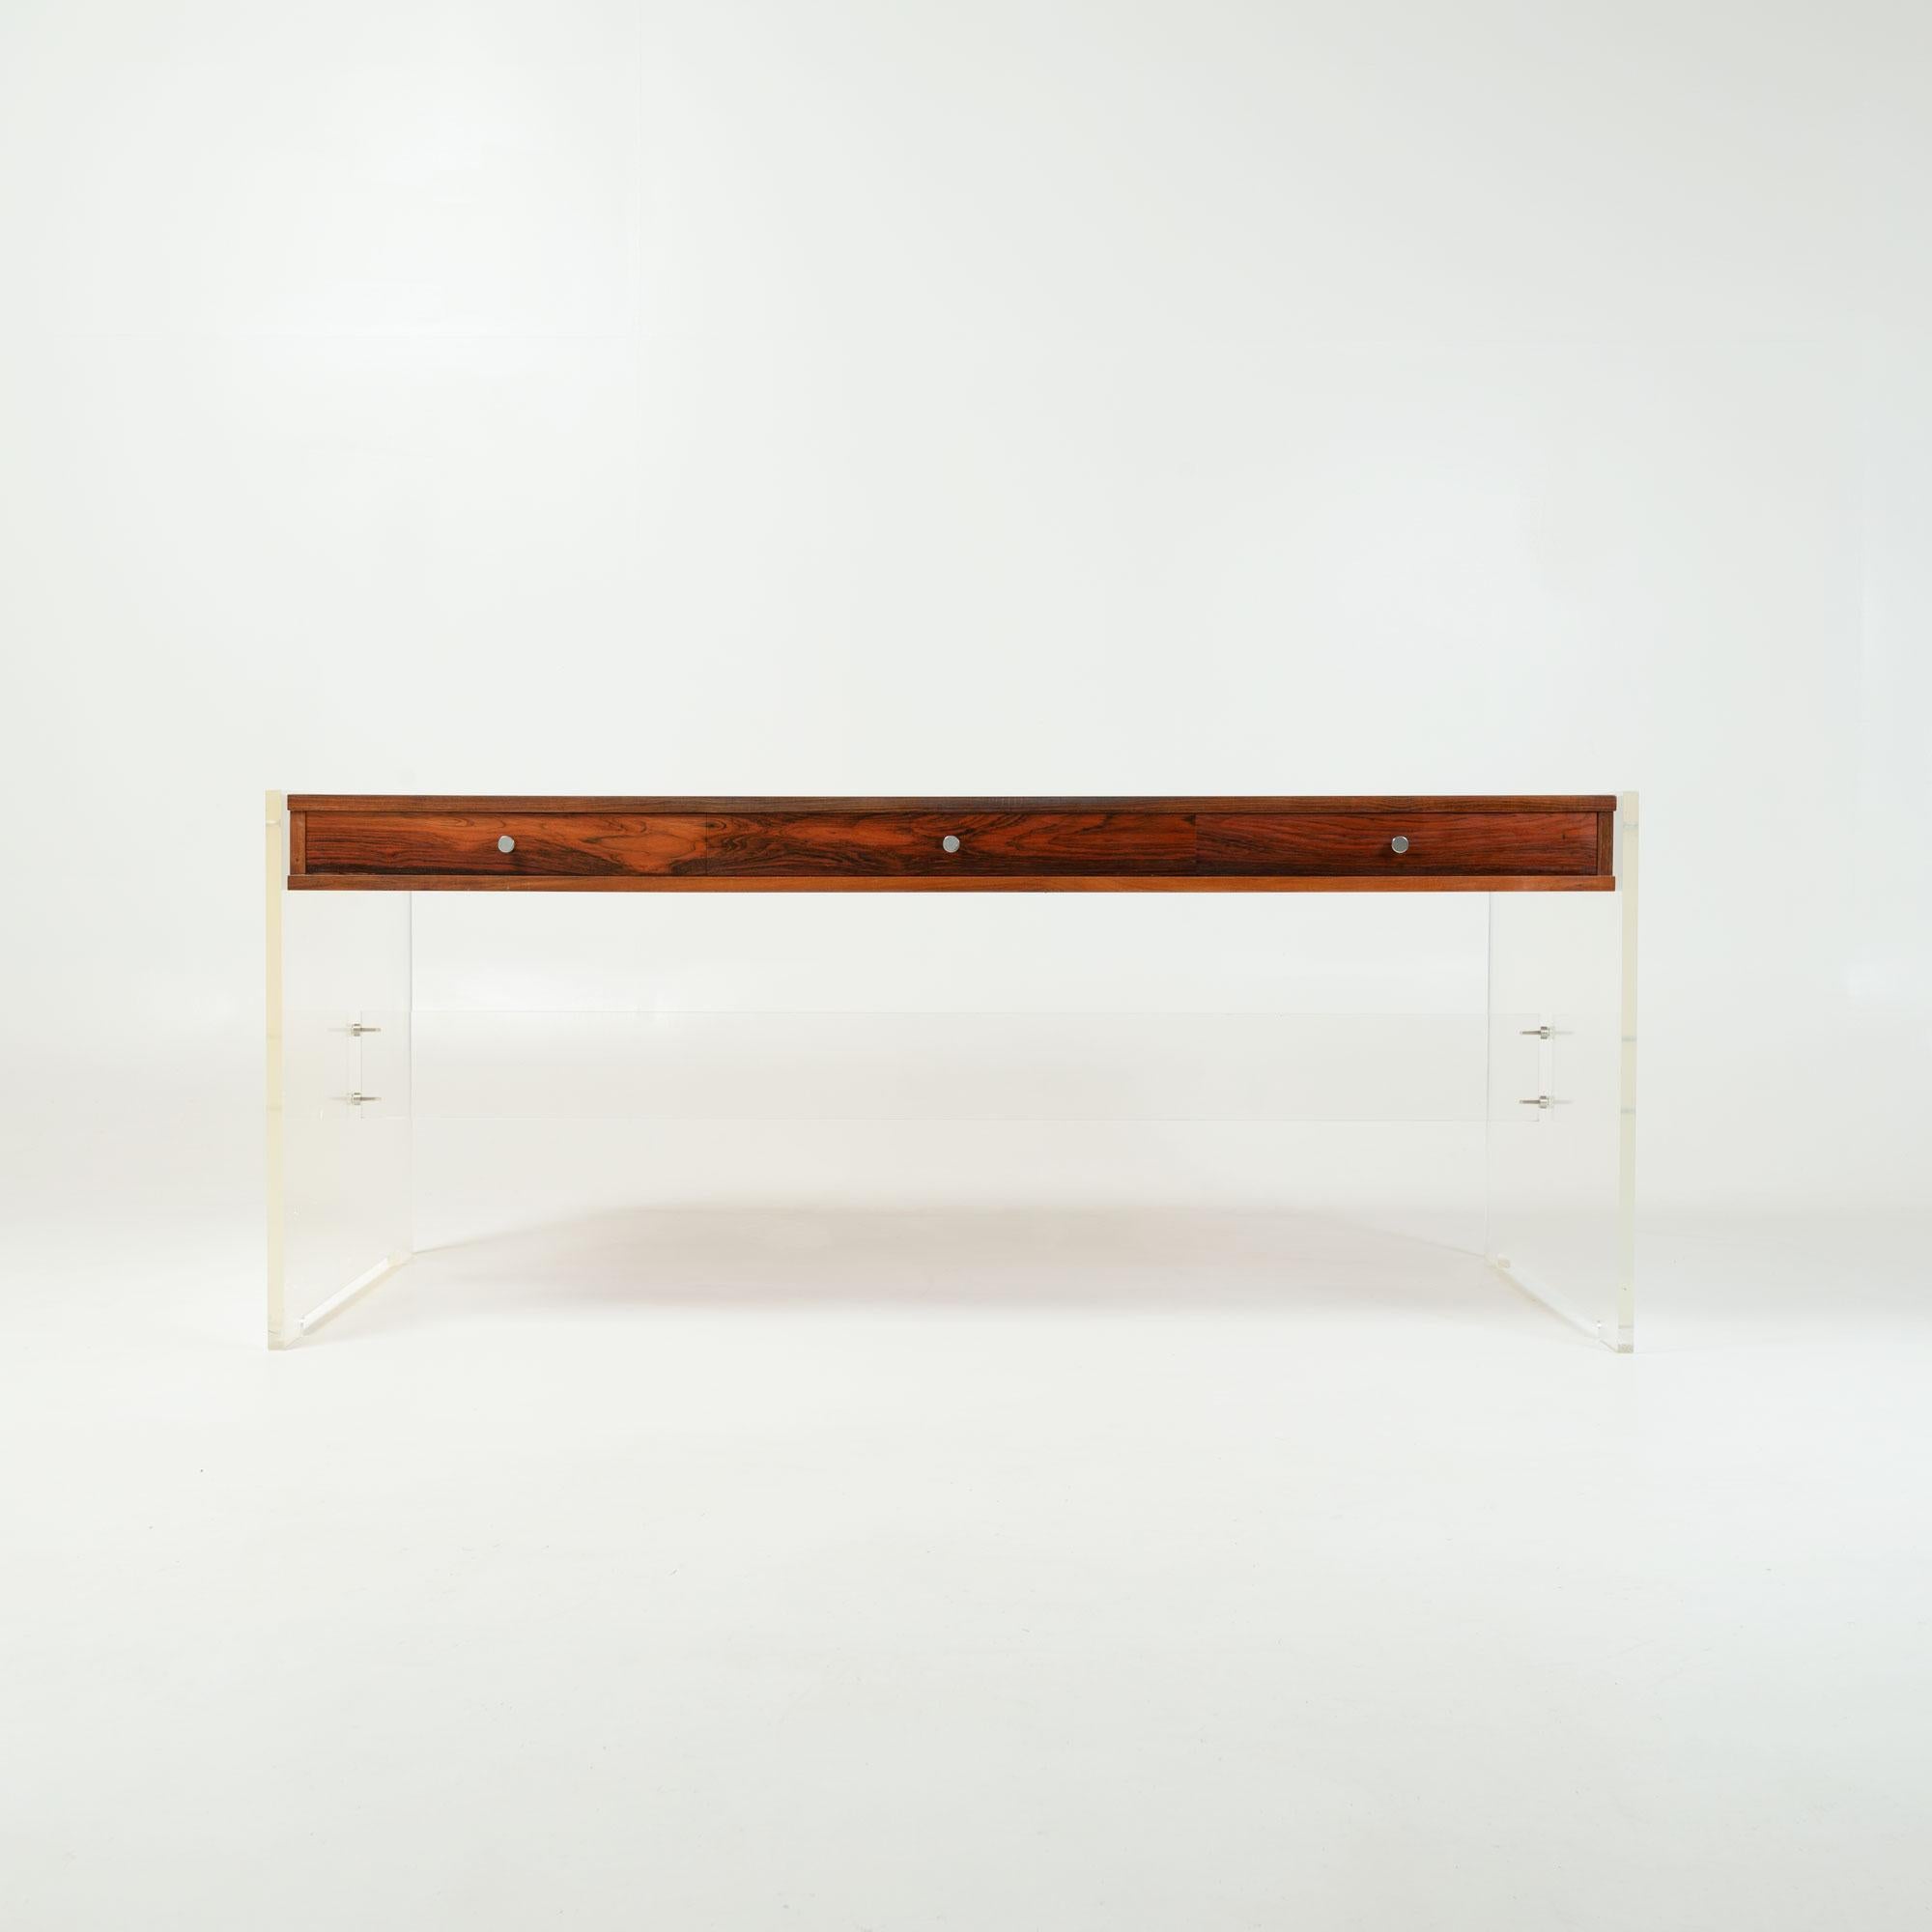 A rare an exceptional executive desk designed by Poul Nørreklit for Georg Petersens Møbelfabrik in the 70s. Poul Nørreklit most recognizable work often combine the use of acrylic and wood in furniture making, resulting in a futuristic take on